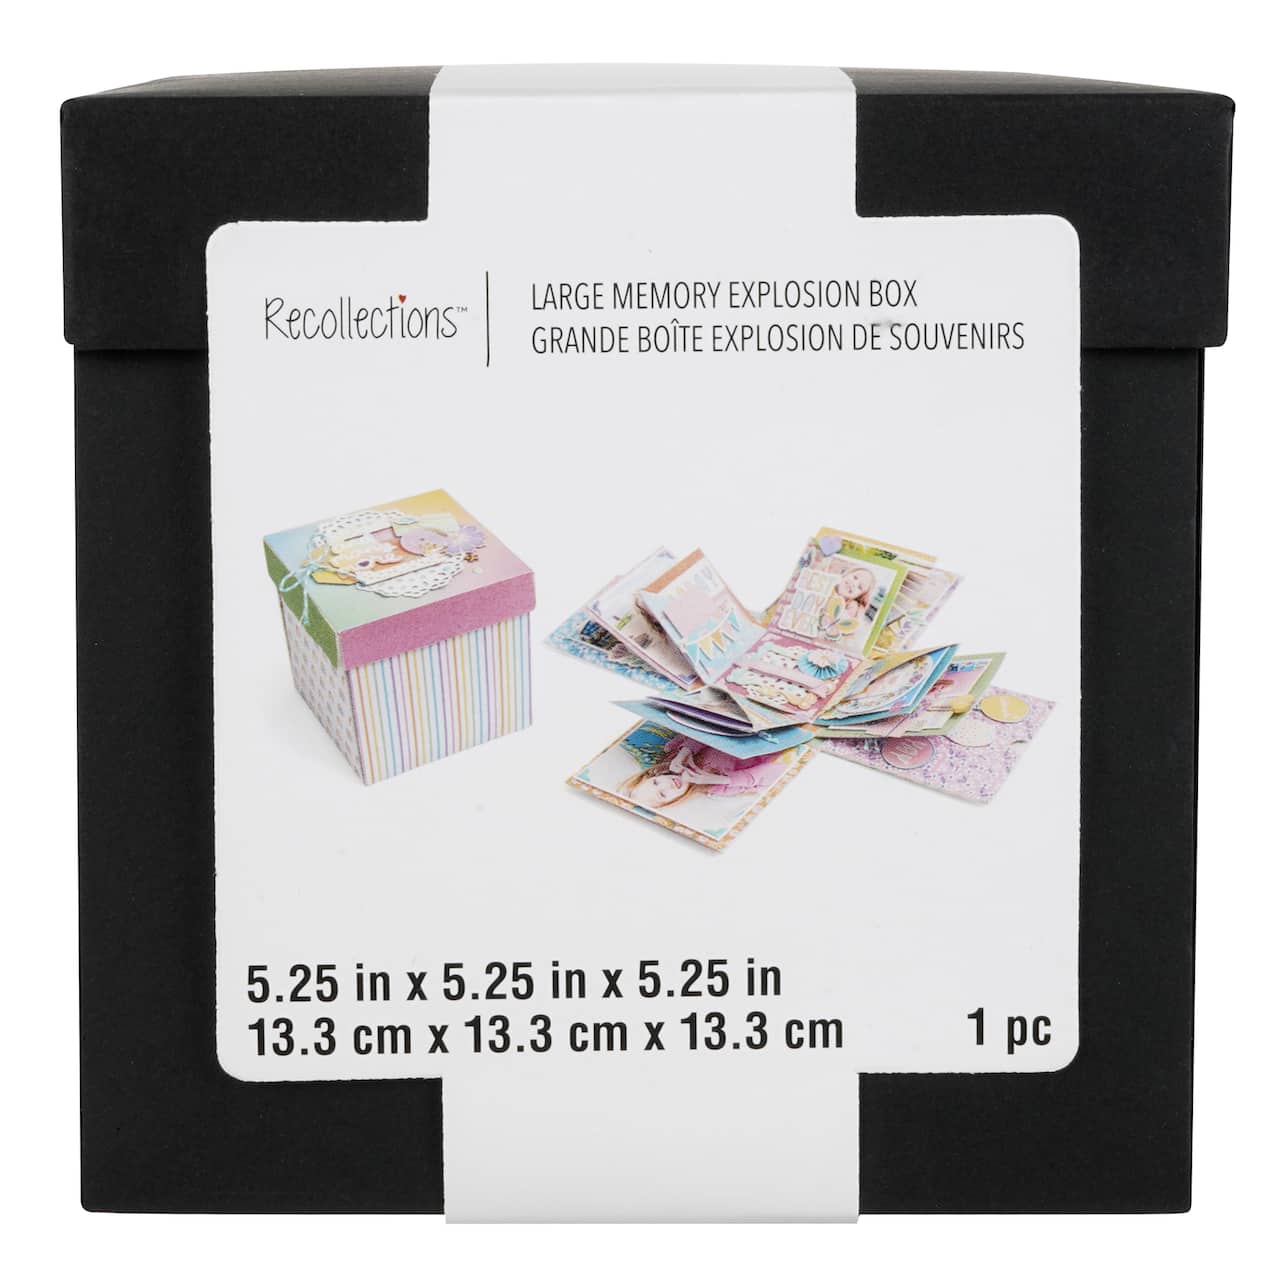 5 Black Memory Explosion Box by Recollections™